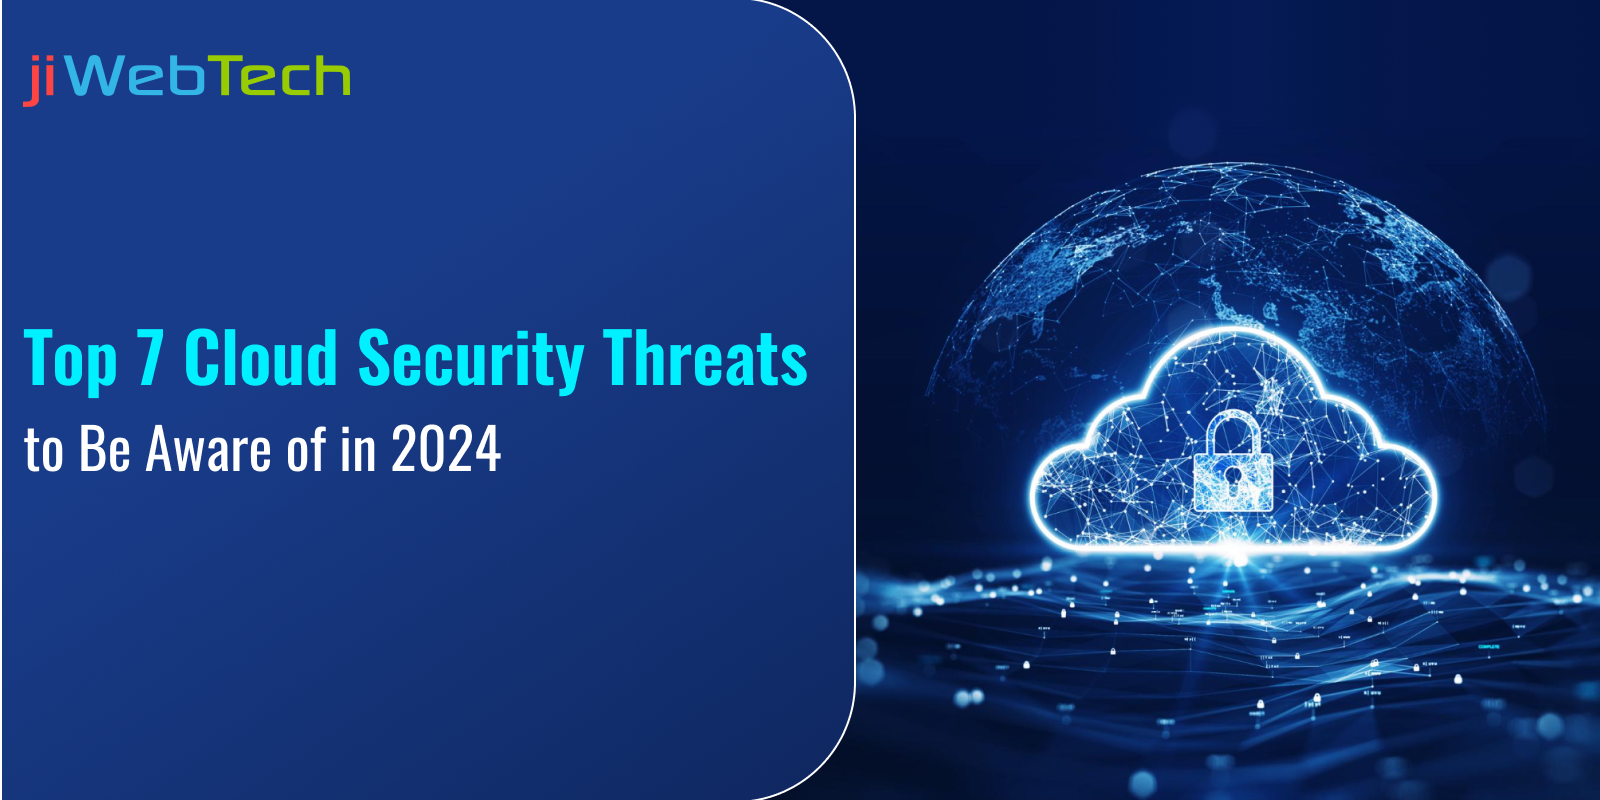 Top 7 Cloud Security Threats To Be Aware of In 2024